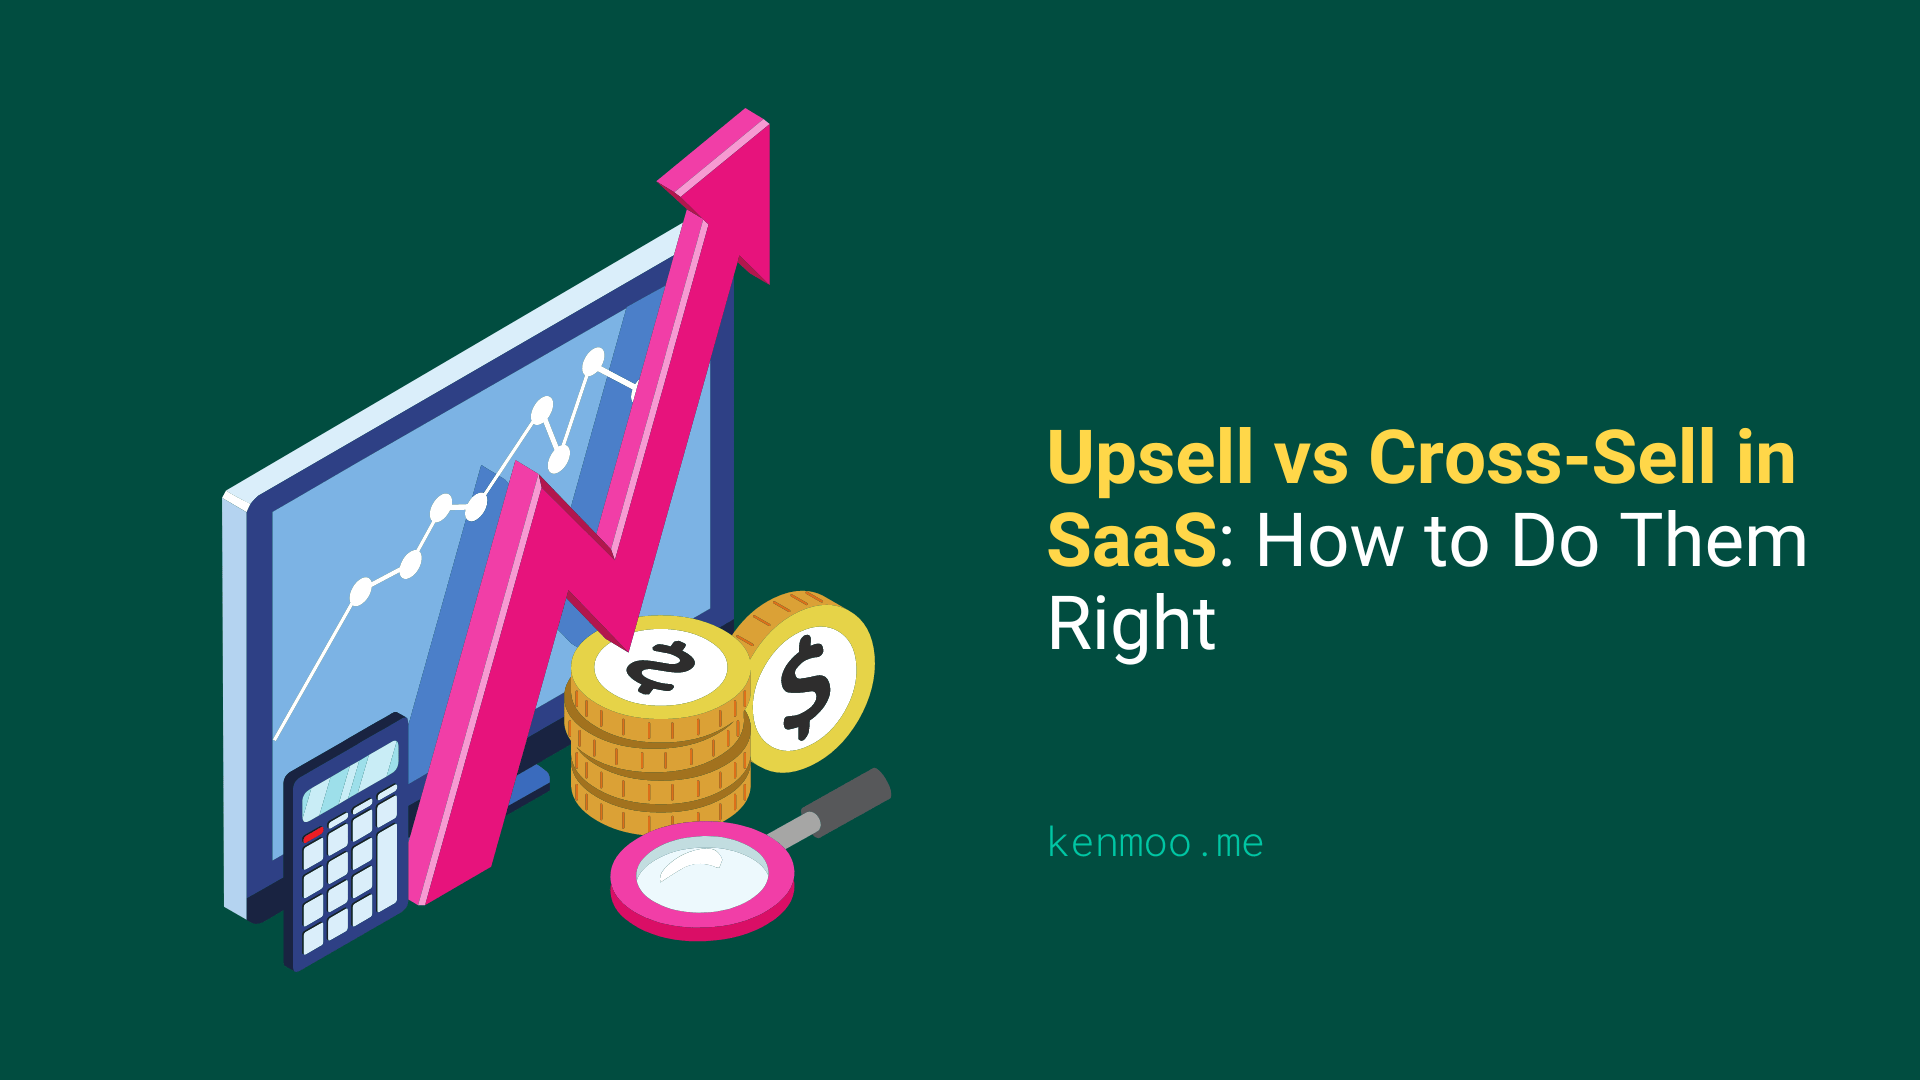 Upsell vs Cross-Sell in SaaS: How to Do Them Right